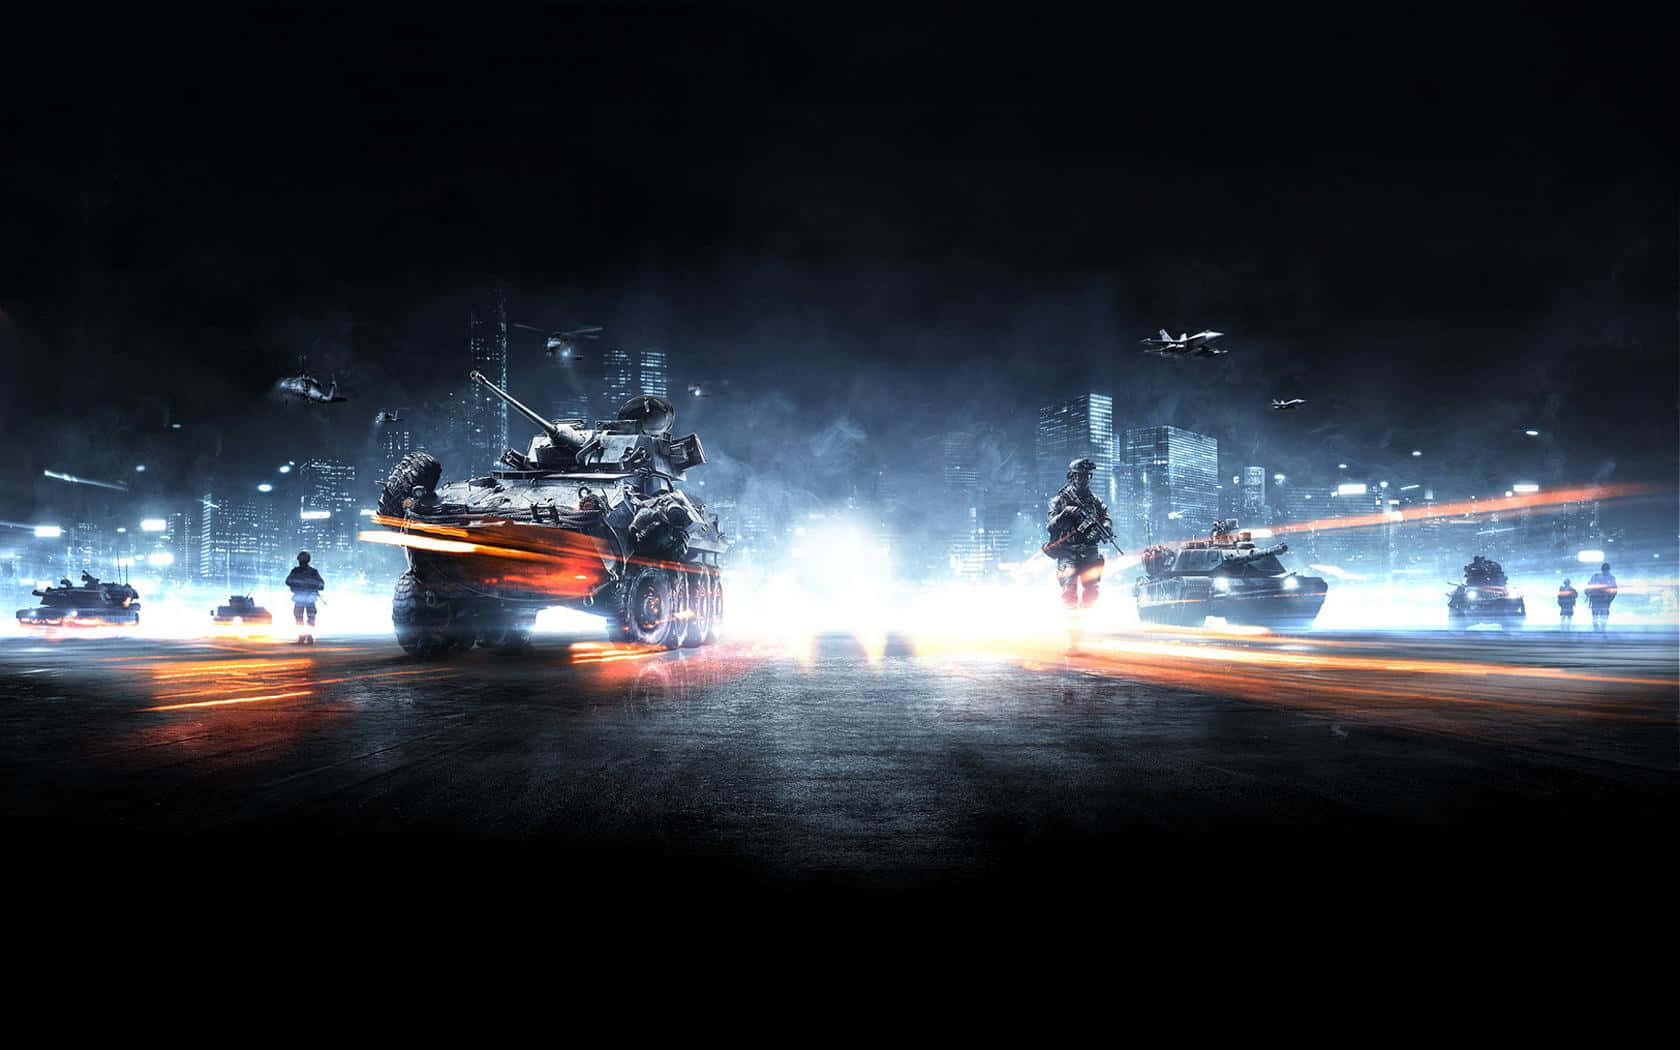 Experience the intensity of warfare with Battlefield 3